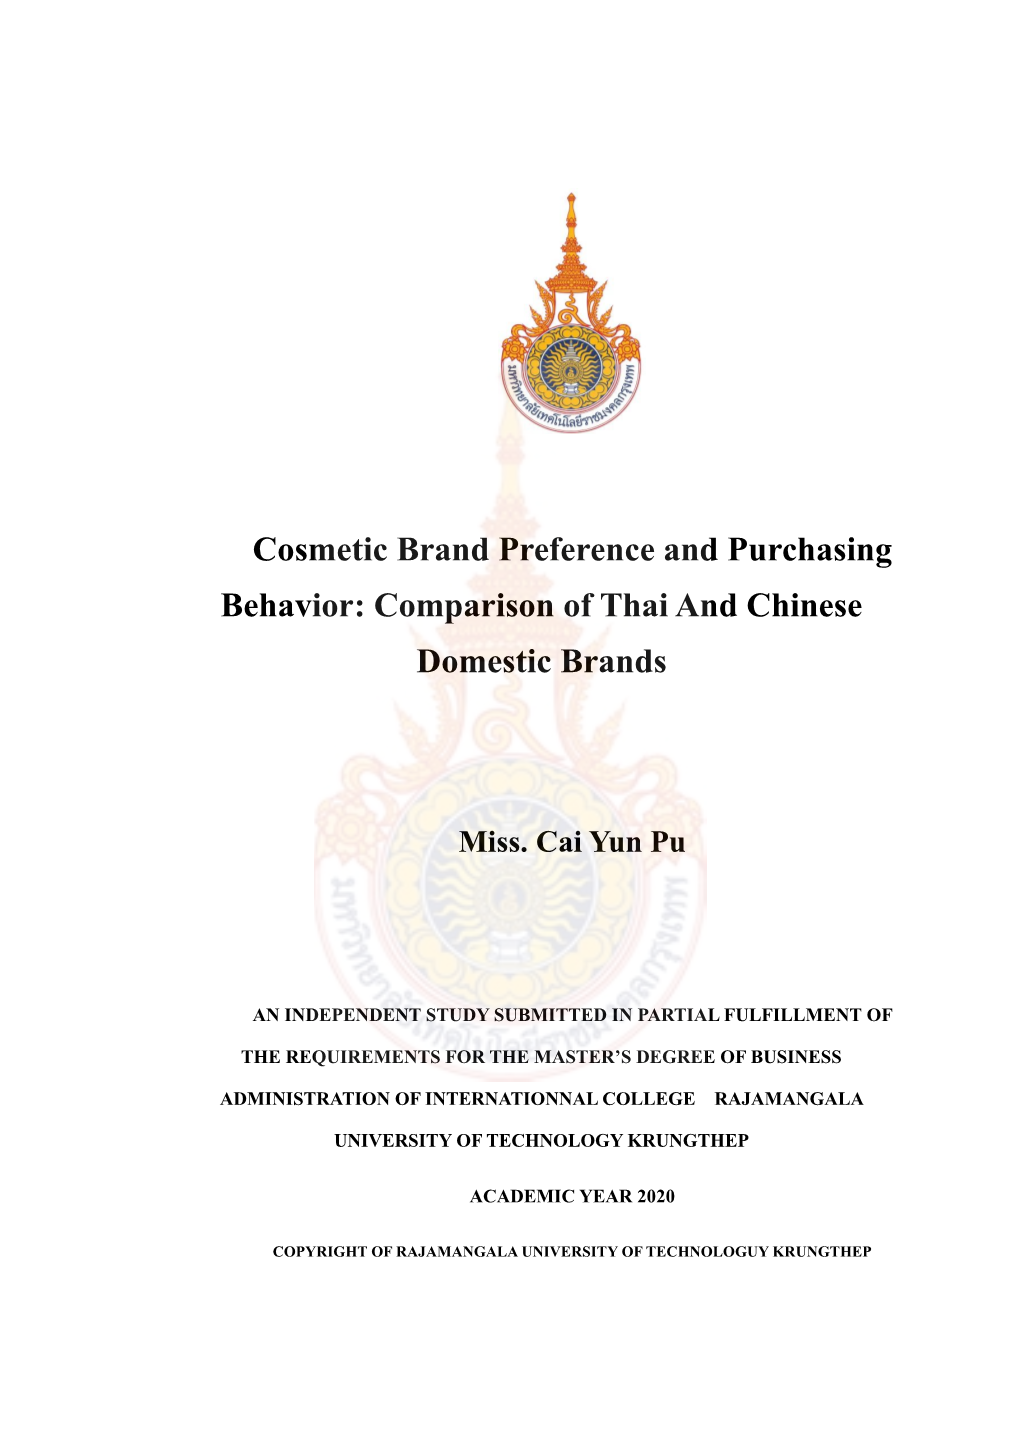 Cosmetic Brand Preference and Purchasing Behavior: Comparison of Thai and Chinese Domestic Brands